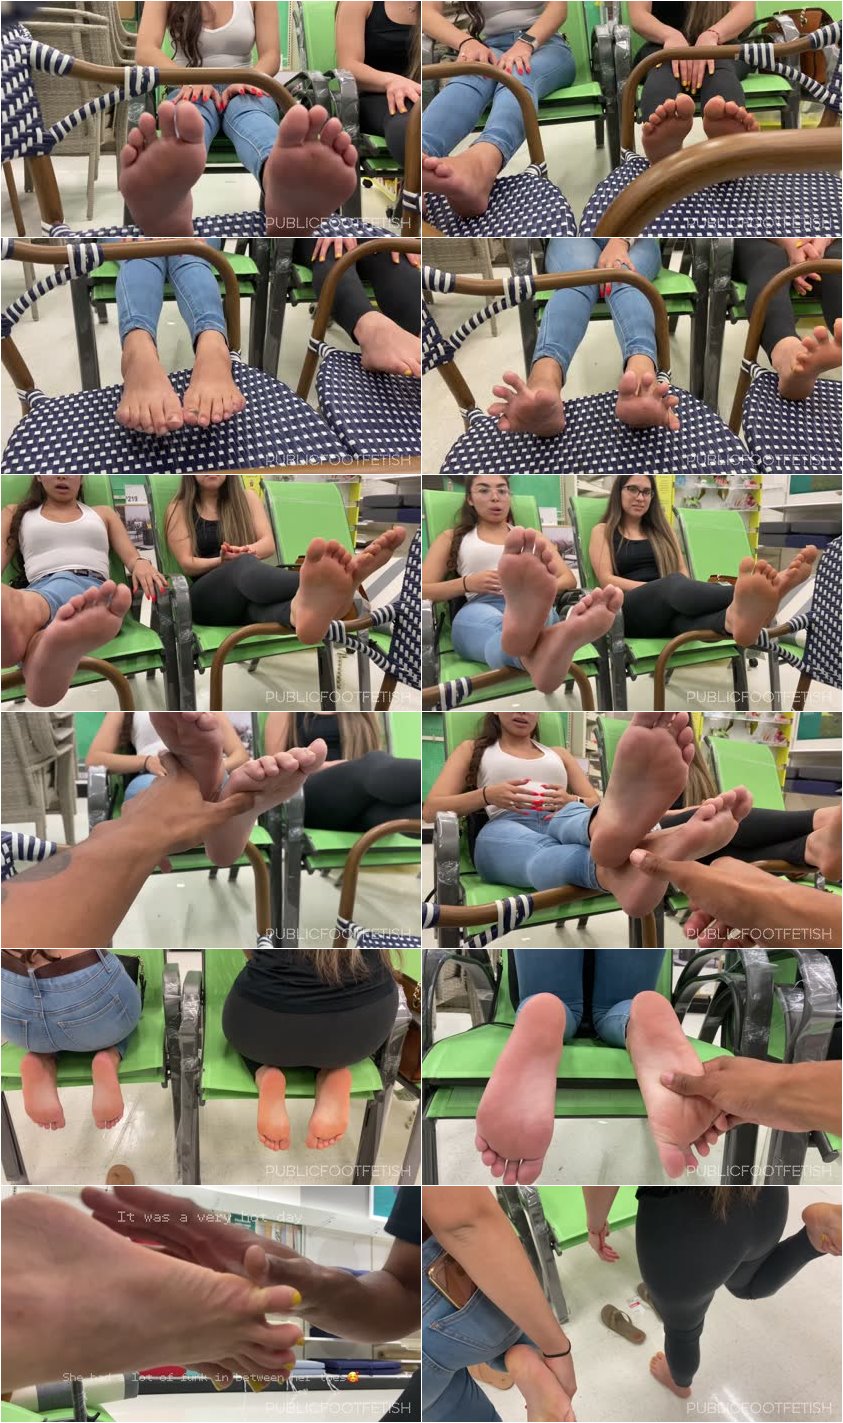 Latina friends Stephanie And Heather Beautiful toe wiggling feet sniffing Quarantine Foot Fetish - publicfootfetish pic